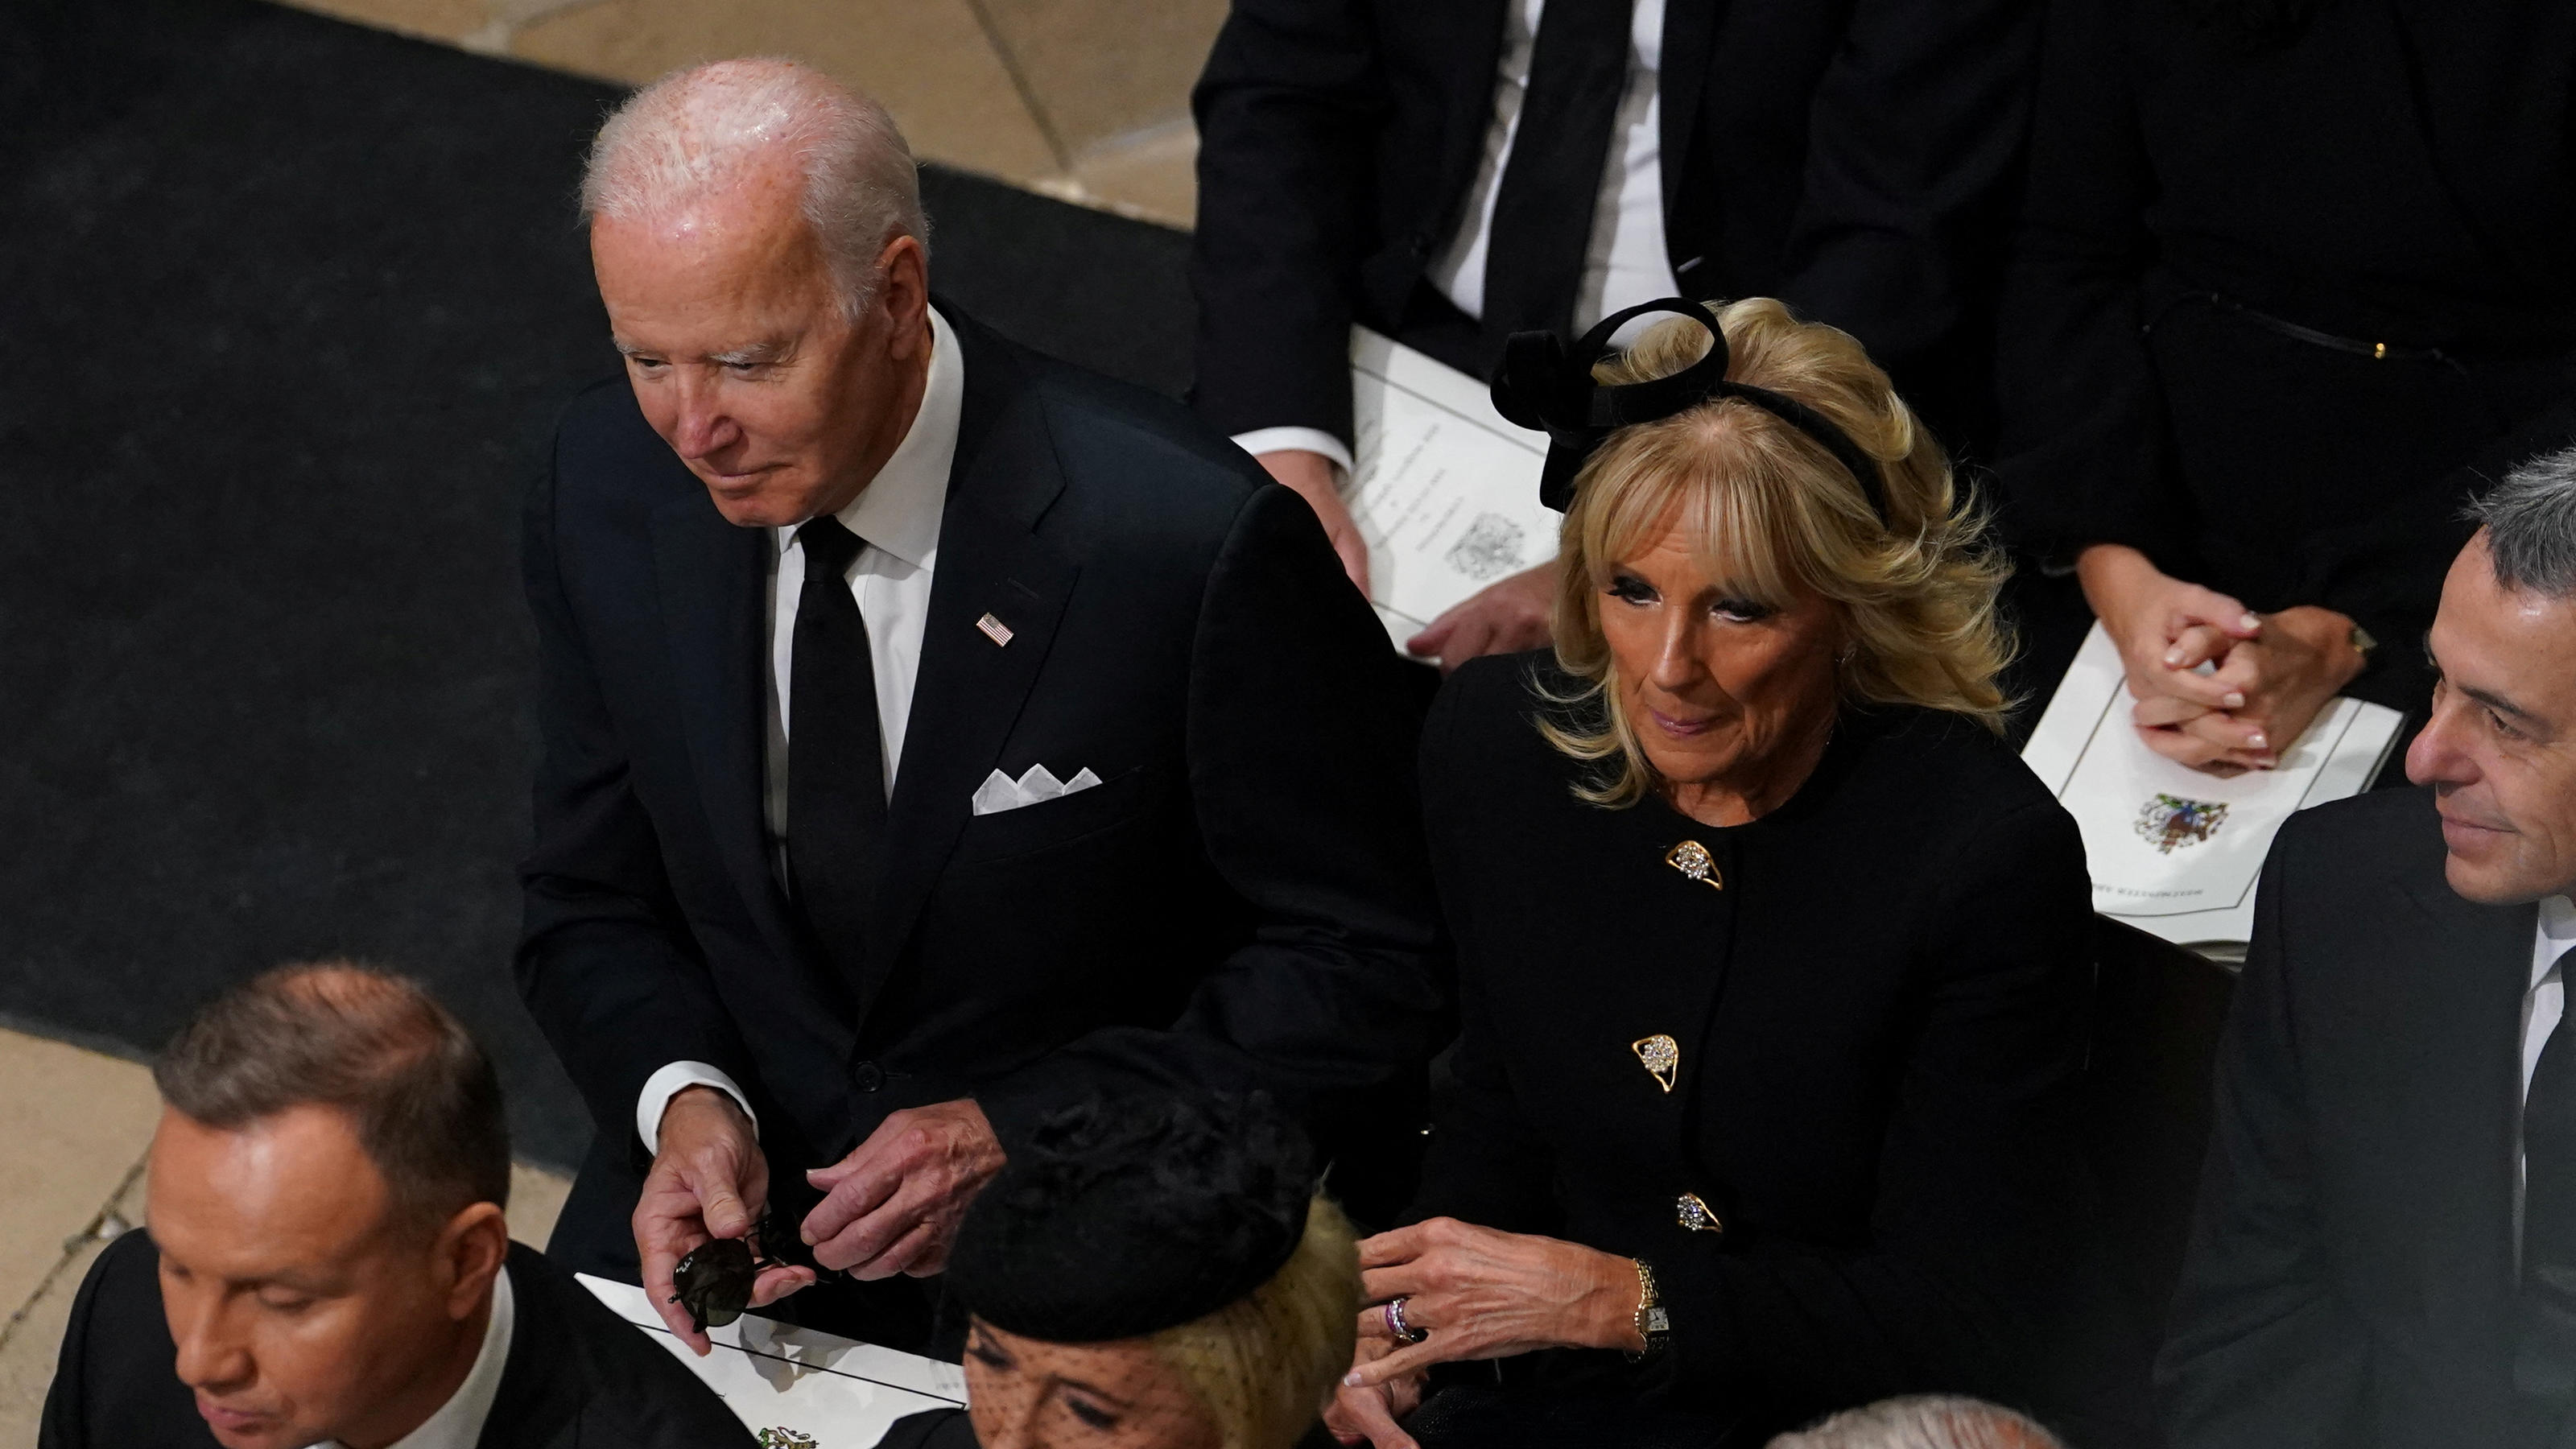 US President Joe Biden accompanied by the First Lady Jill Biden  arriving for the State Funeral of Queen Elizabeth II, held at Westminster Abbey, London. Picture date: Monday September 19, 2022.    Gareth Fuller/Pool via REUTERS